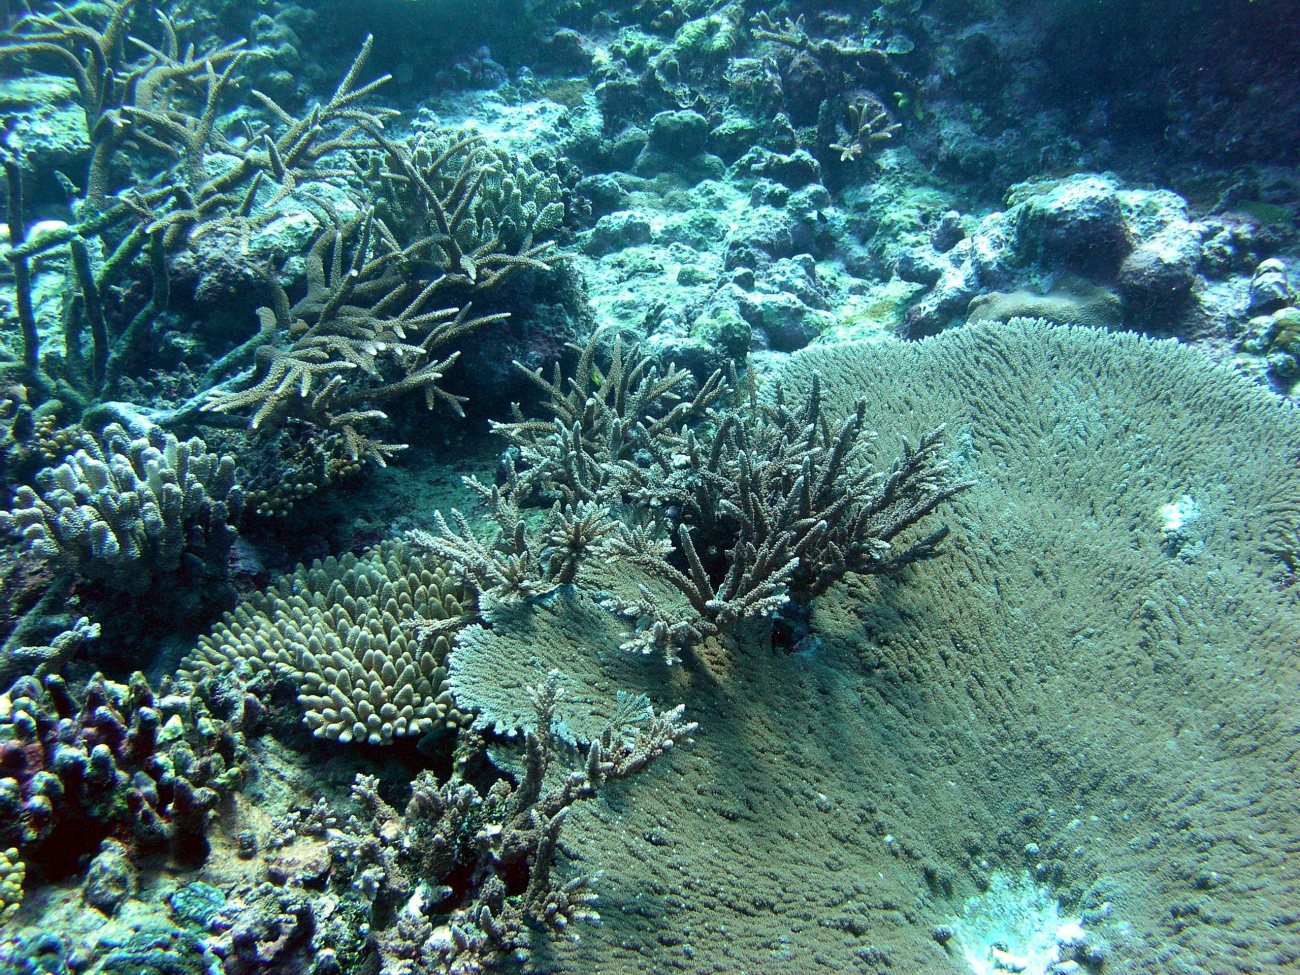 An array of corals